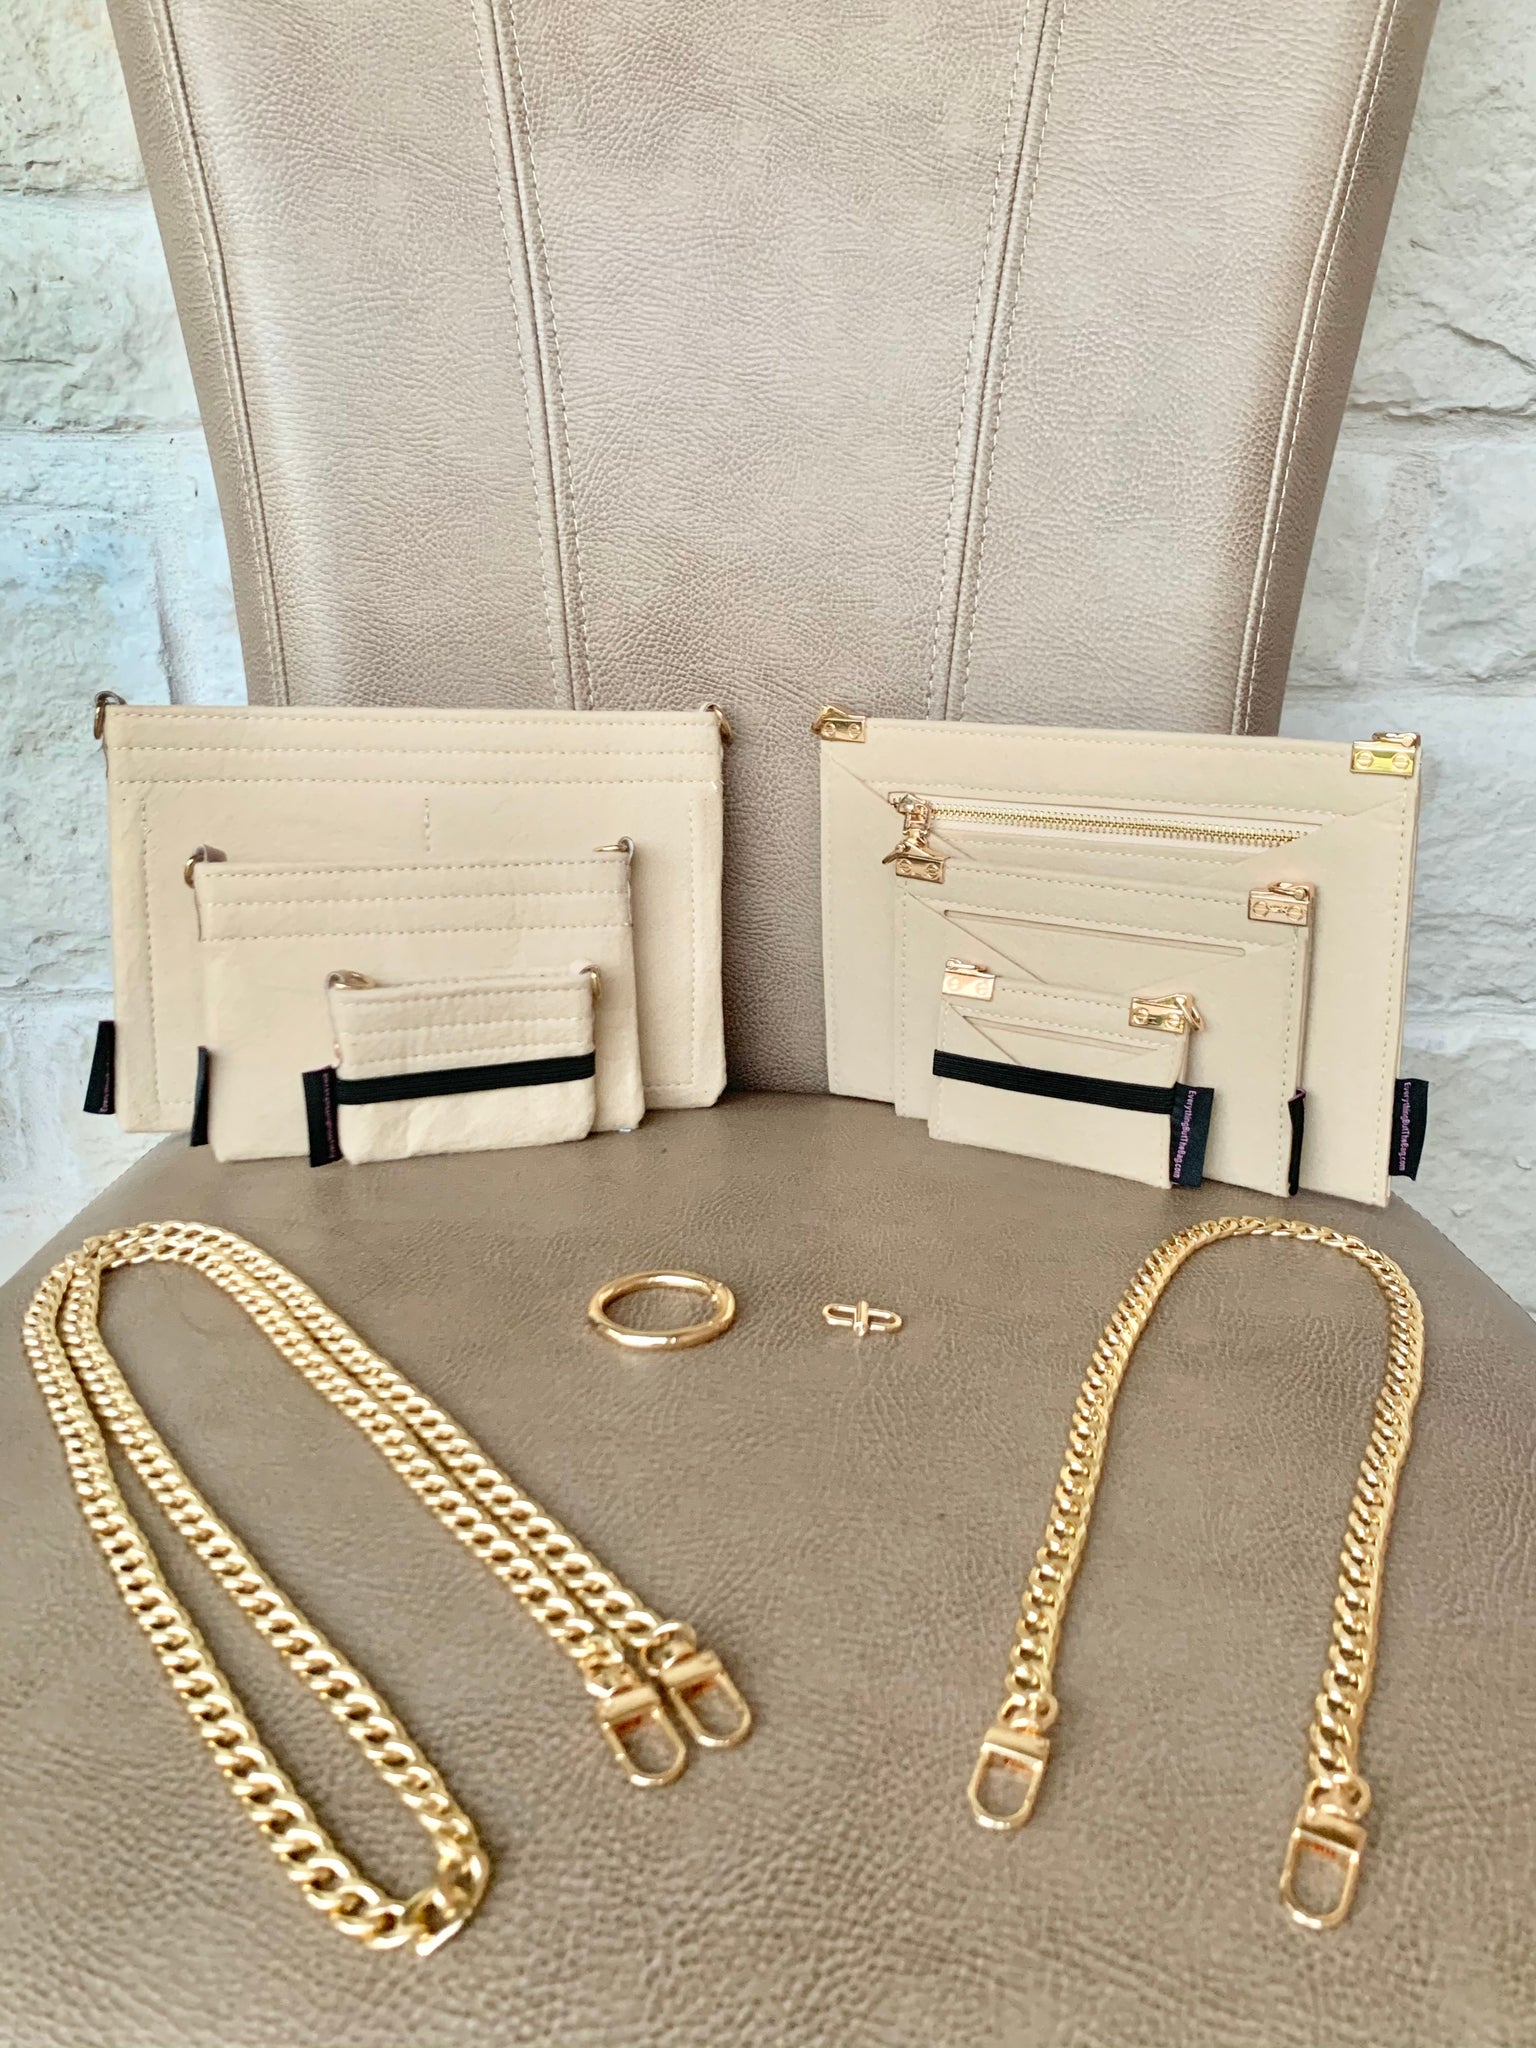 from Her Purse Organizer Insert Conversion Kit with Gold Chains Felt Handbag LV Kirigami Set of 3